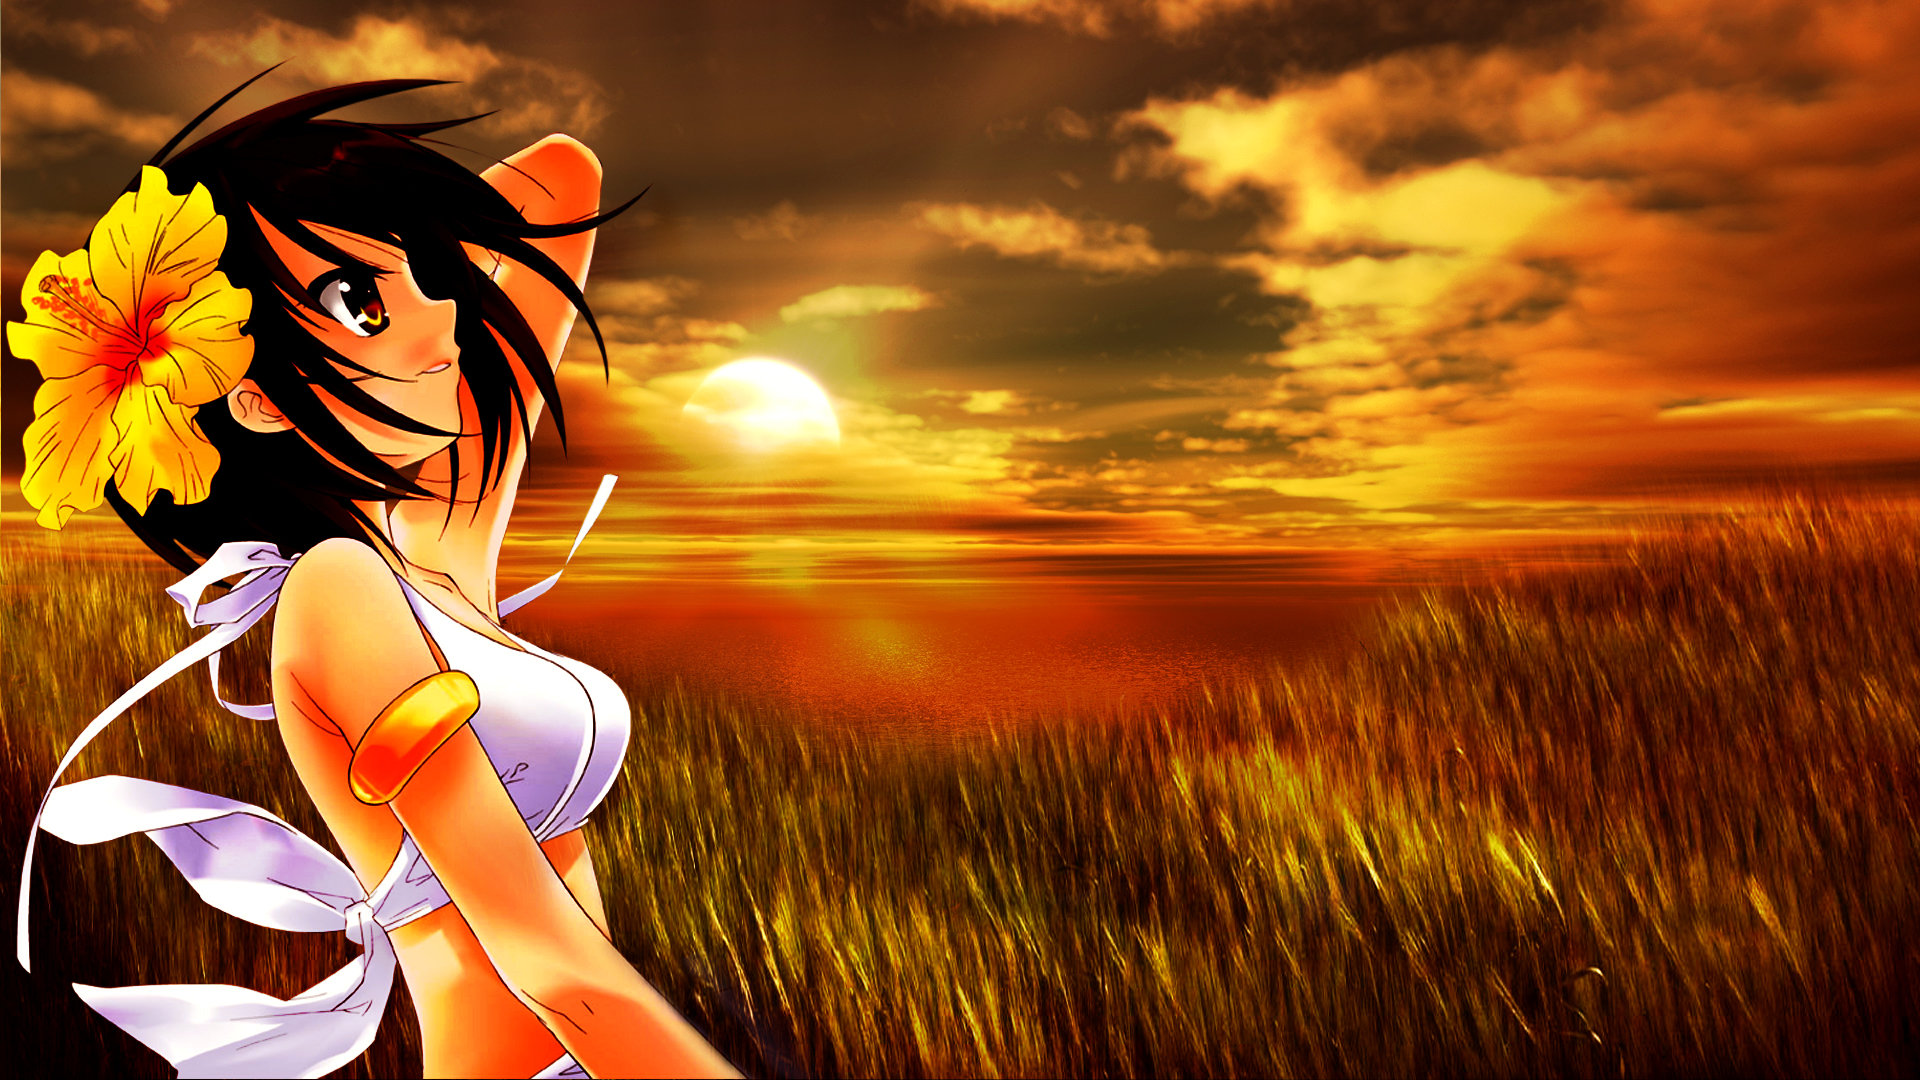 High resolution The Melancholy Of Haruhi Suzumiya hd 1920x1080 background ID:139159 for computer